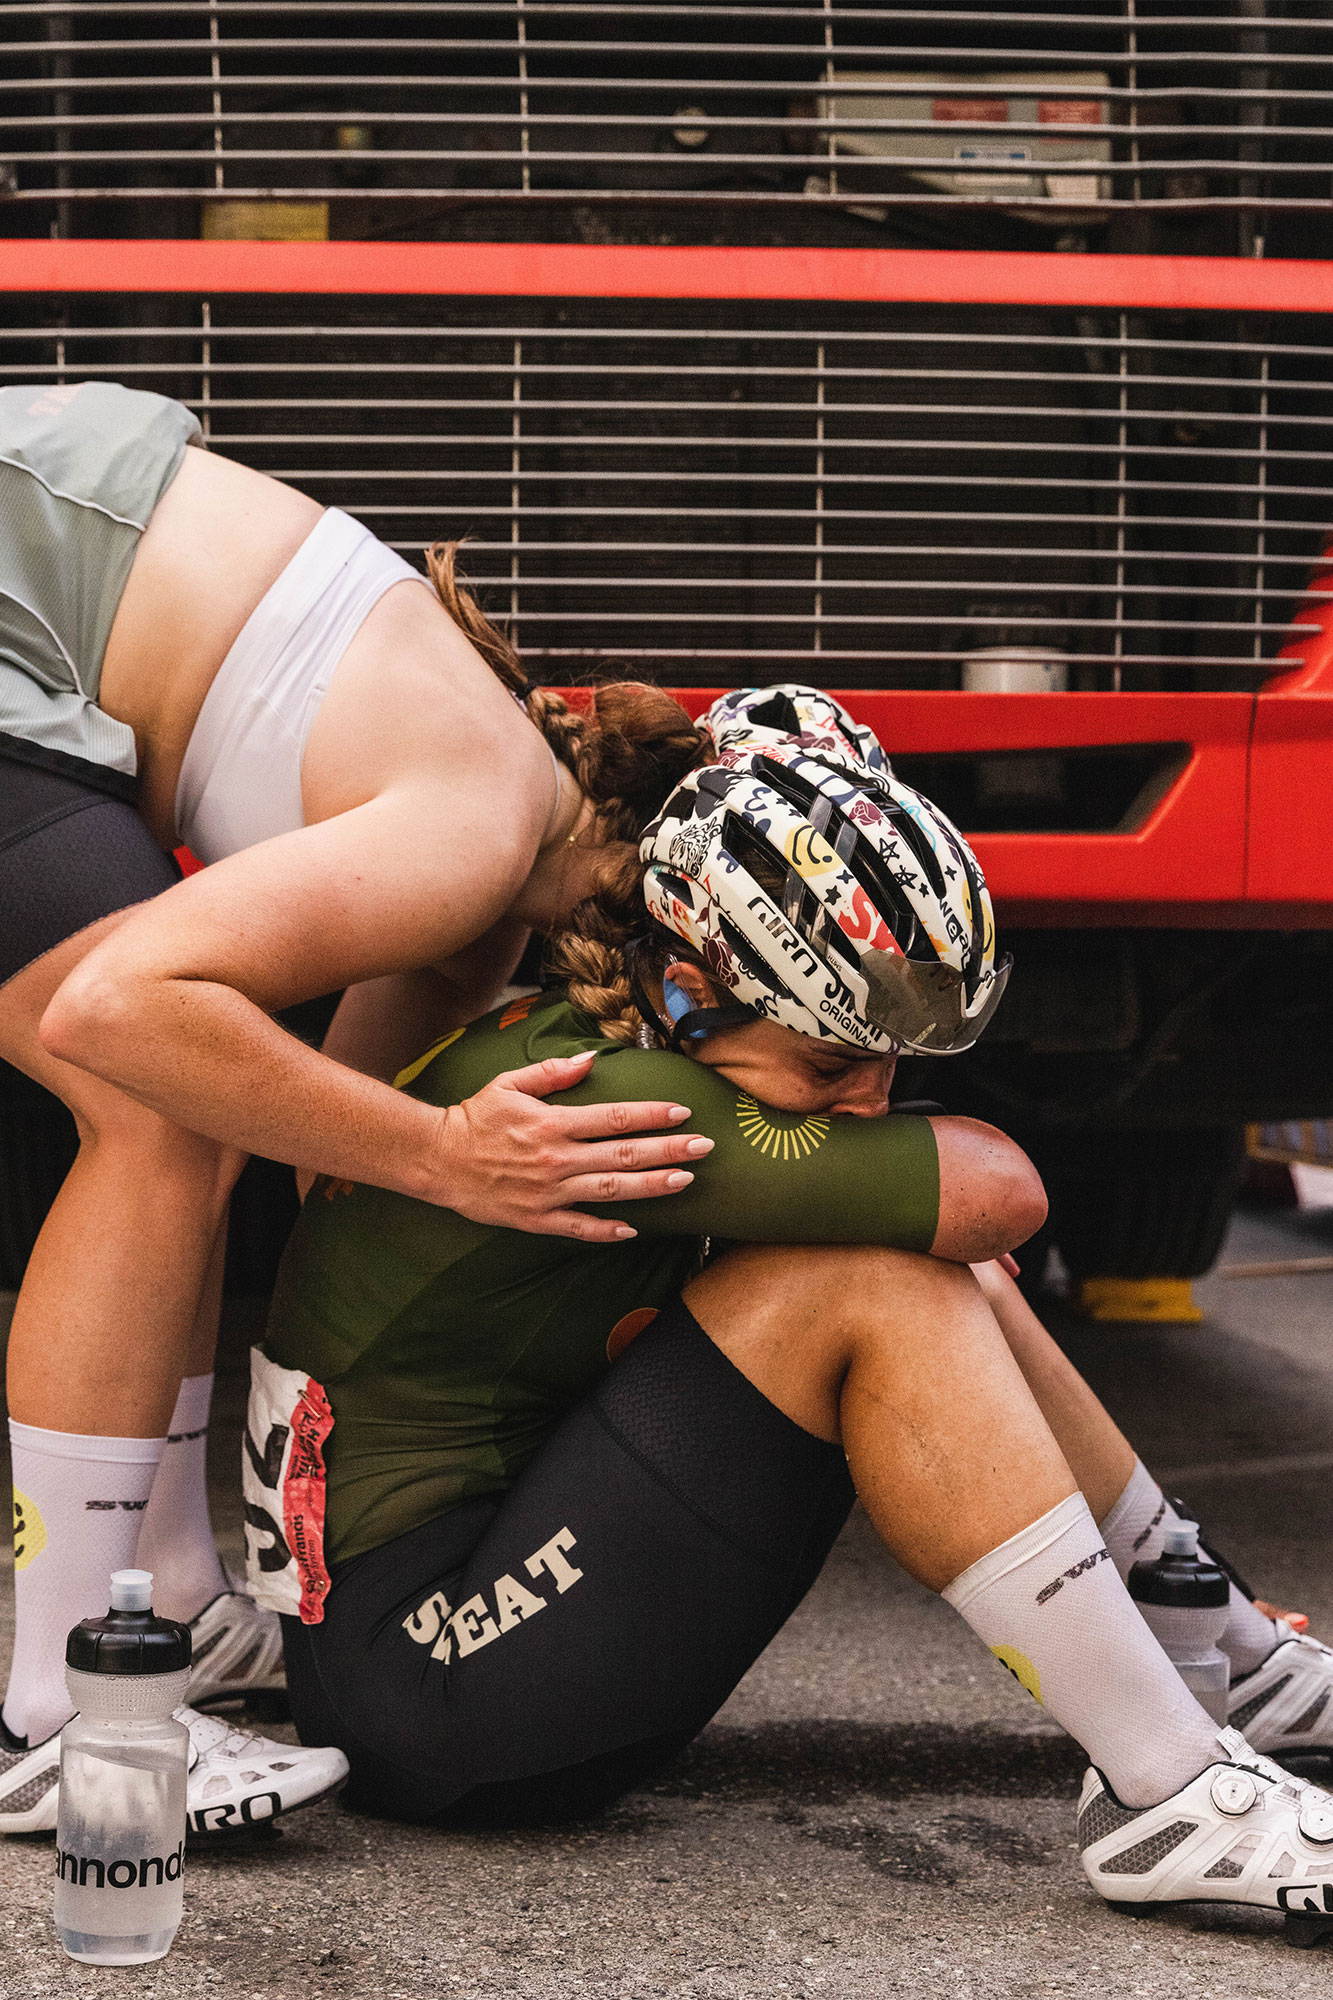 Teammate being consoled after a race